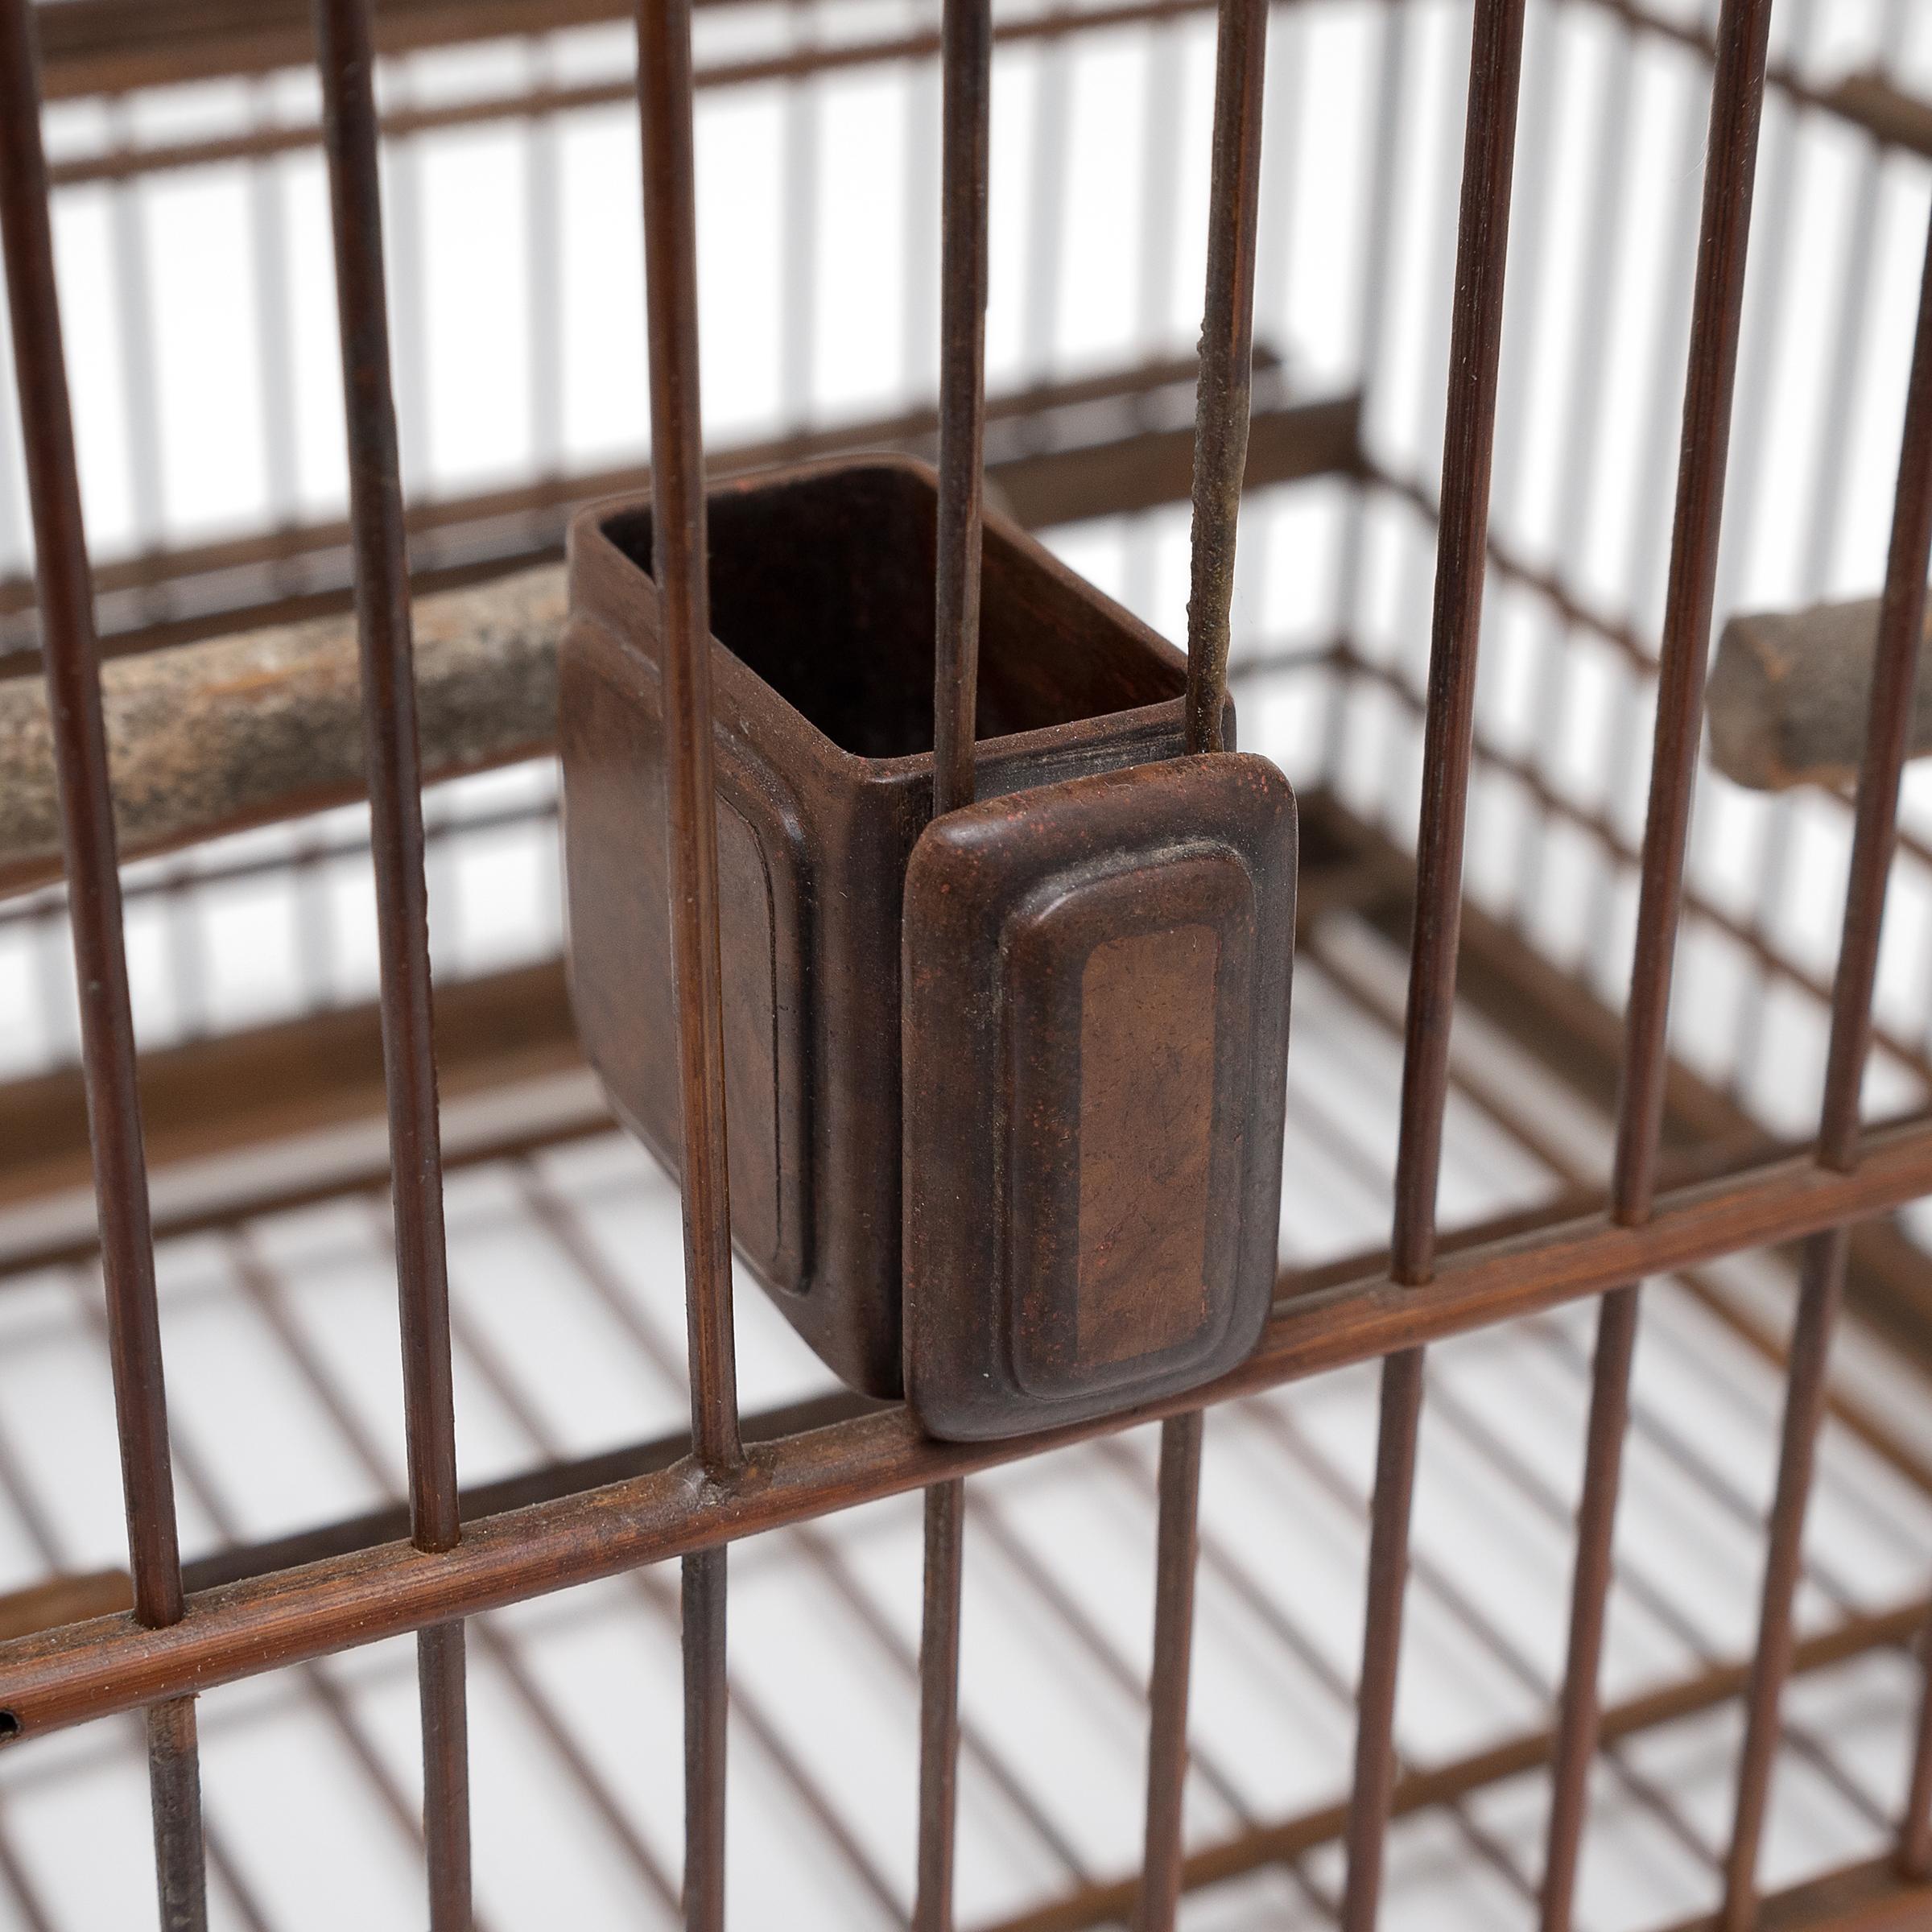 Qing Square Chinese Bamboo Birdcage with Burl Inlay Cup, c. 1900 For Sale